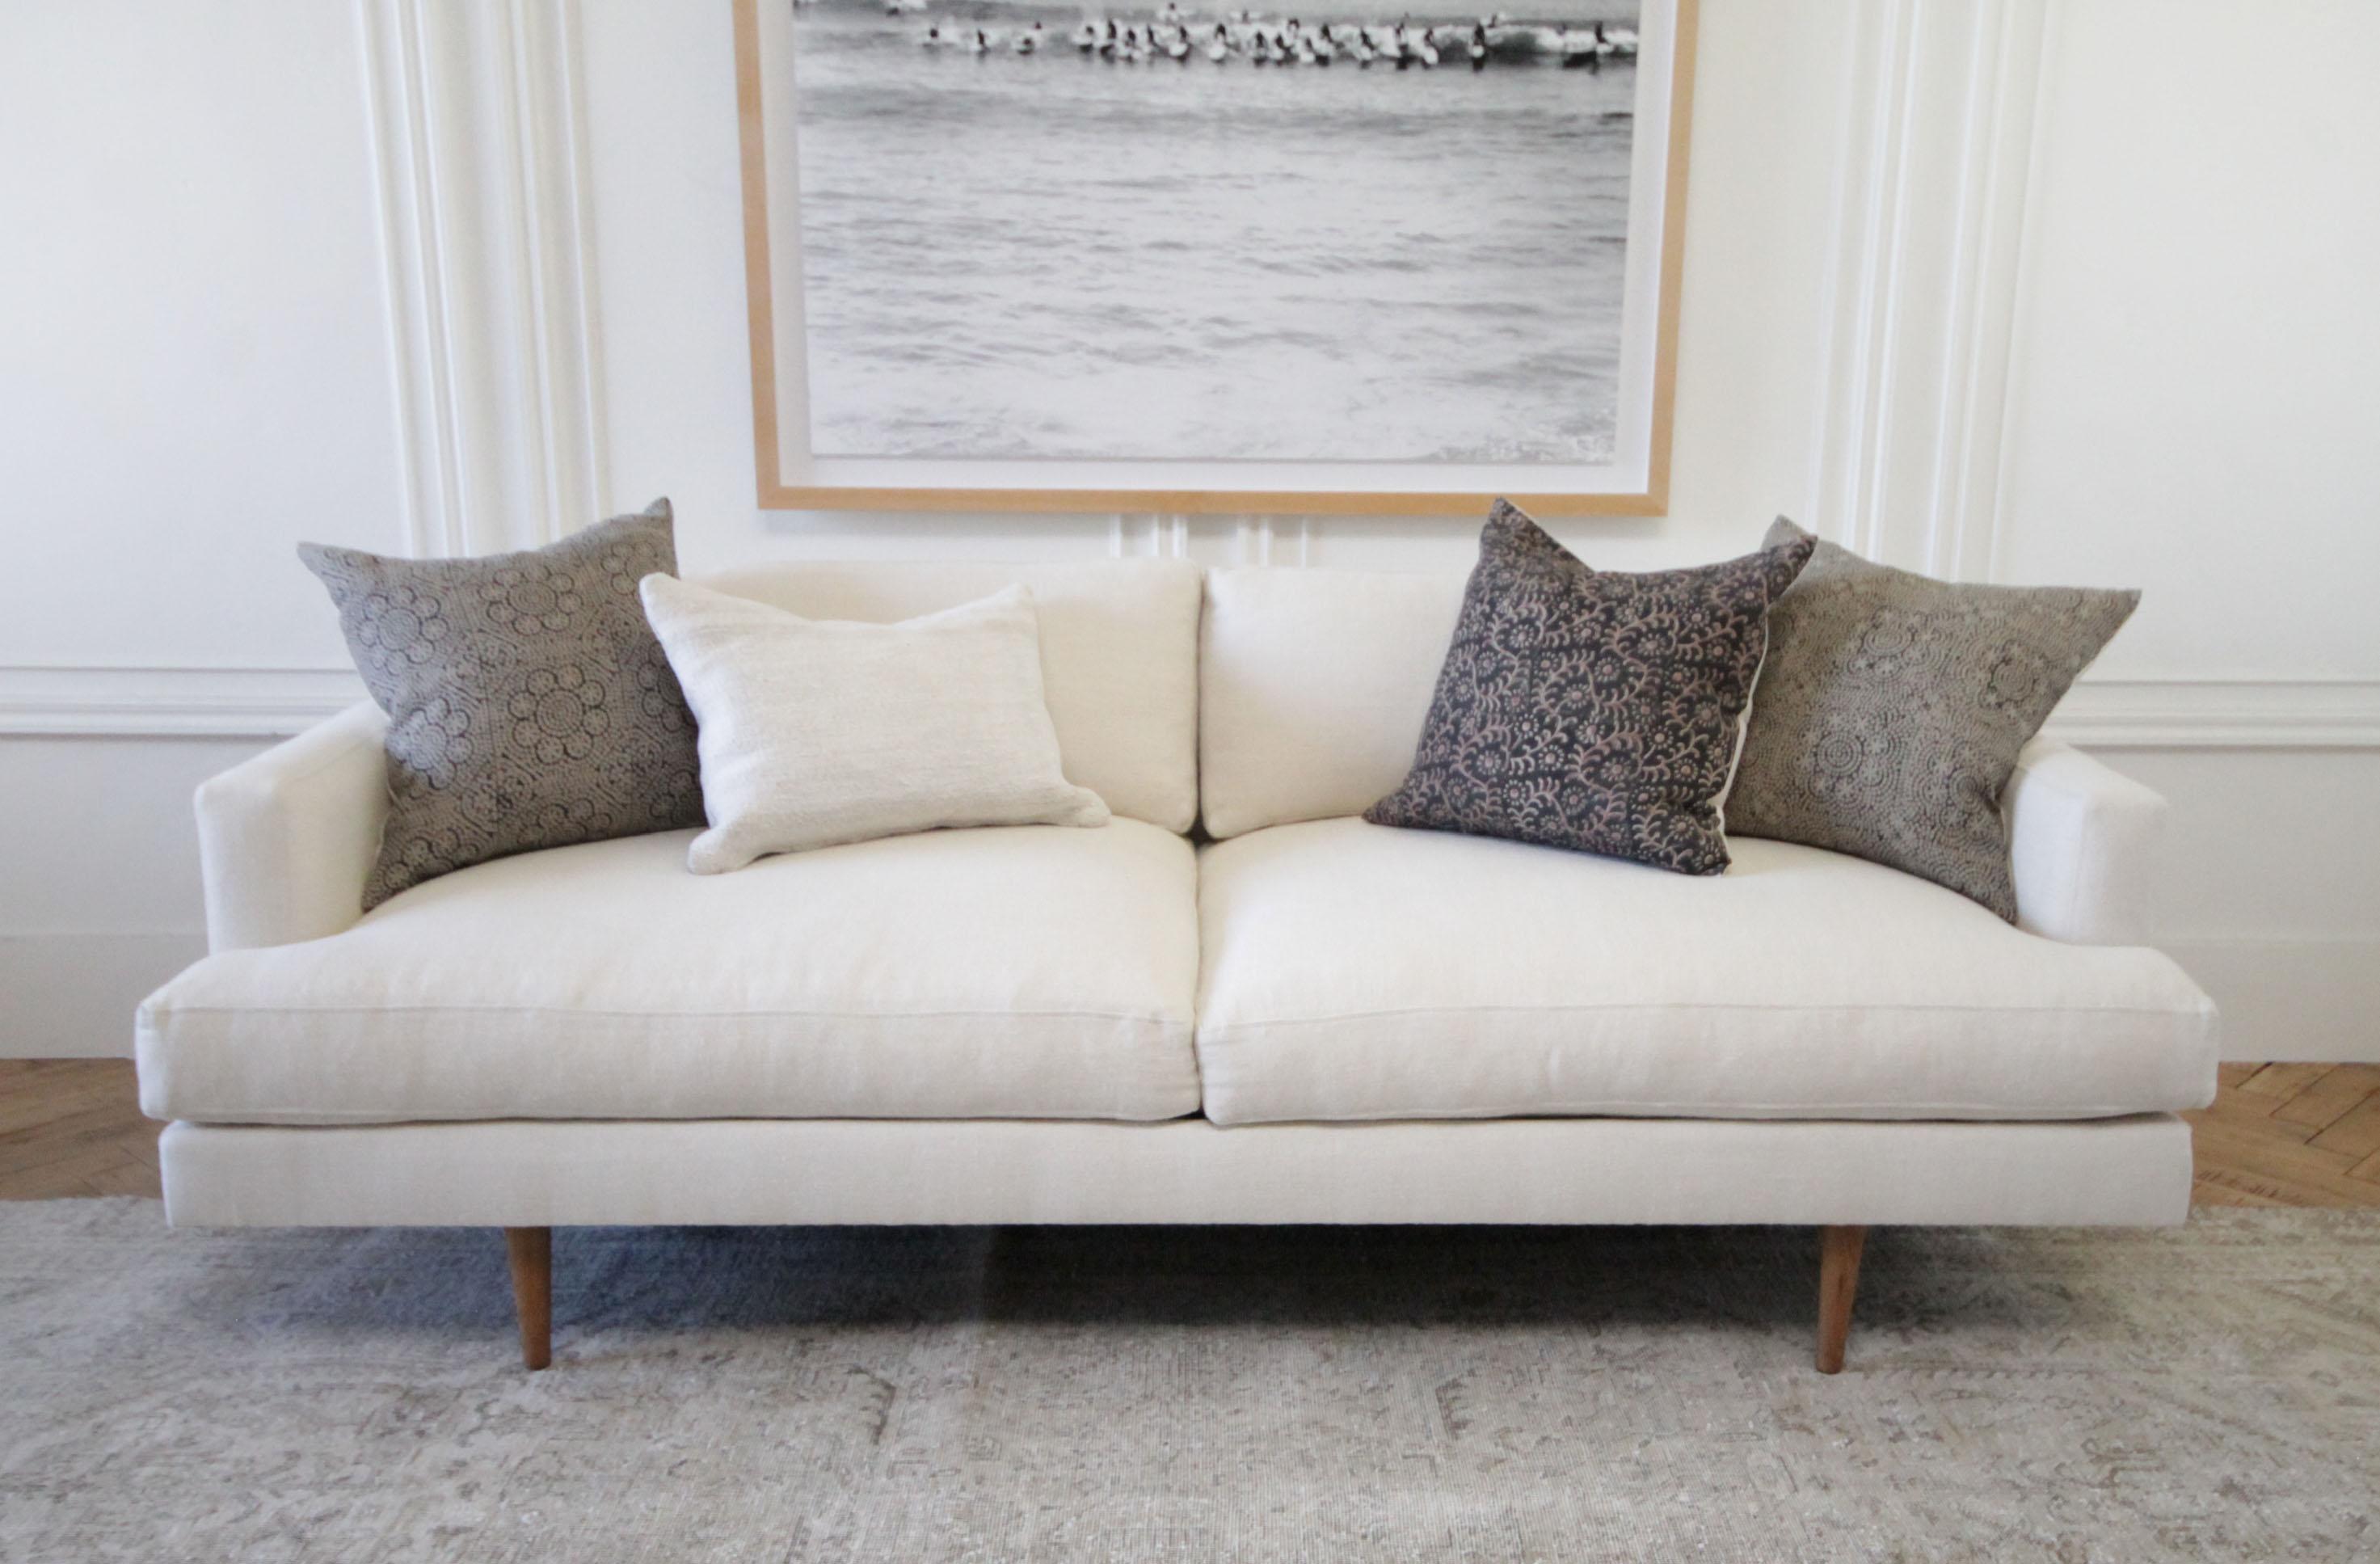 Custom modern Jayson square arm sofa in natural linen with down wrapped seats
Our heavy weight light natural linen is a very light sand color, or oatmeal color. Blends with everything. Modern square arm, with inset Mid-Century Modern style legs in